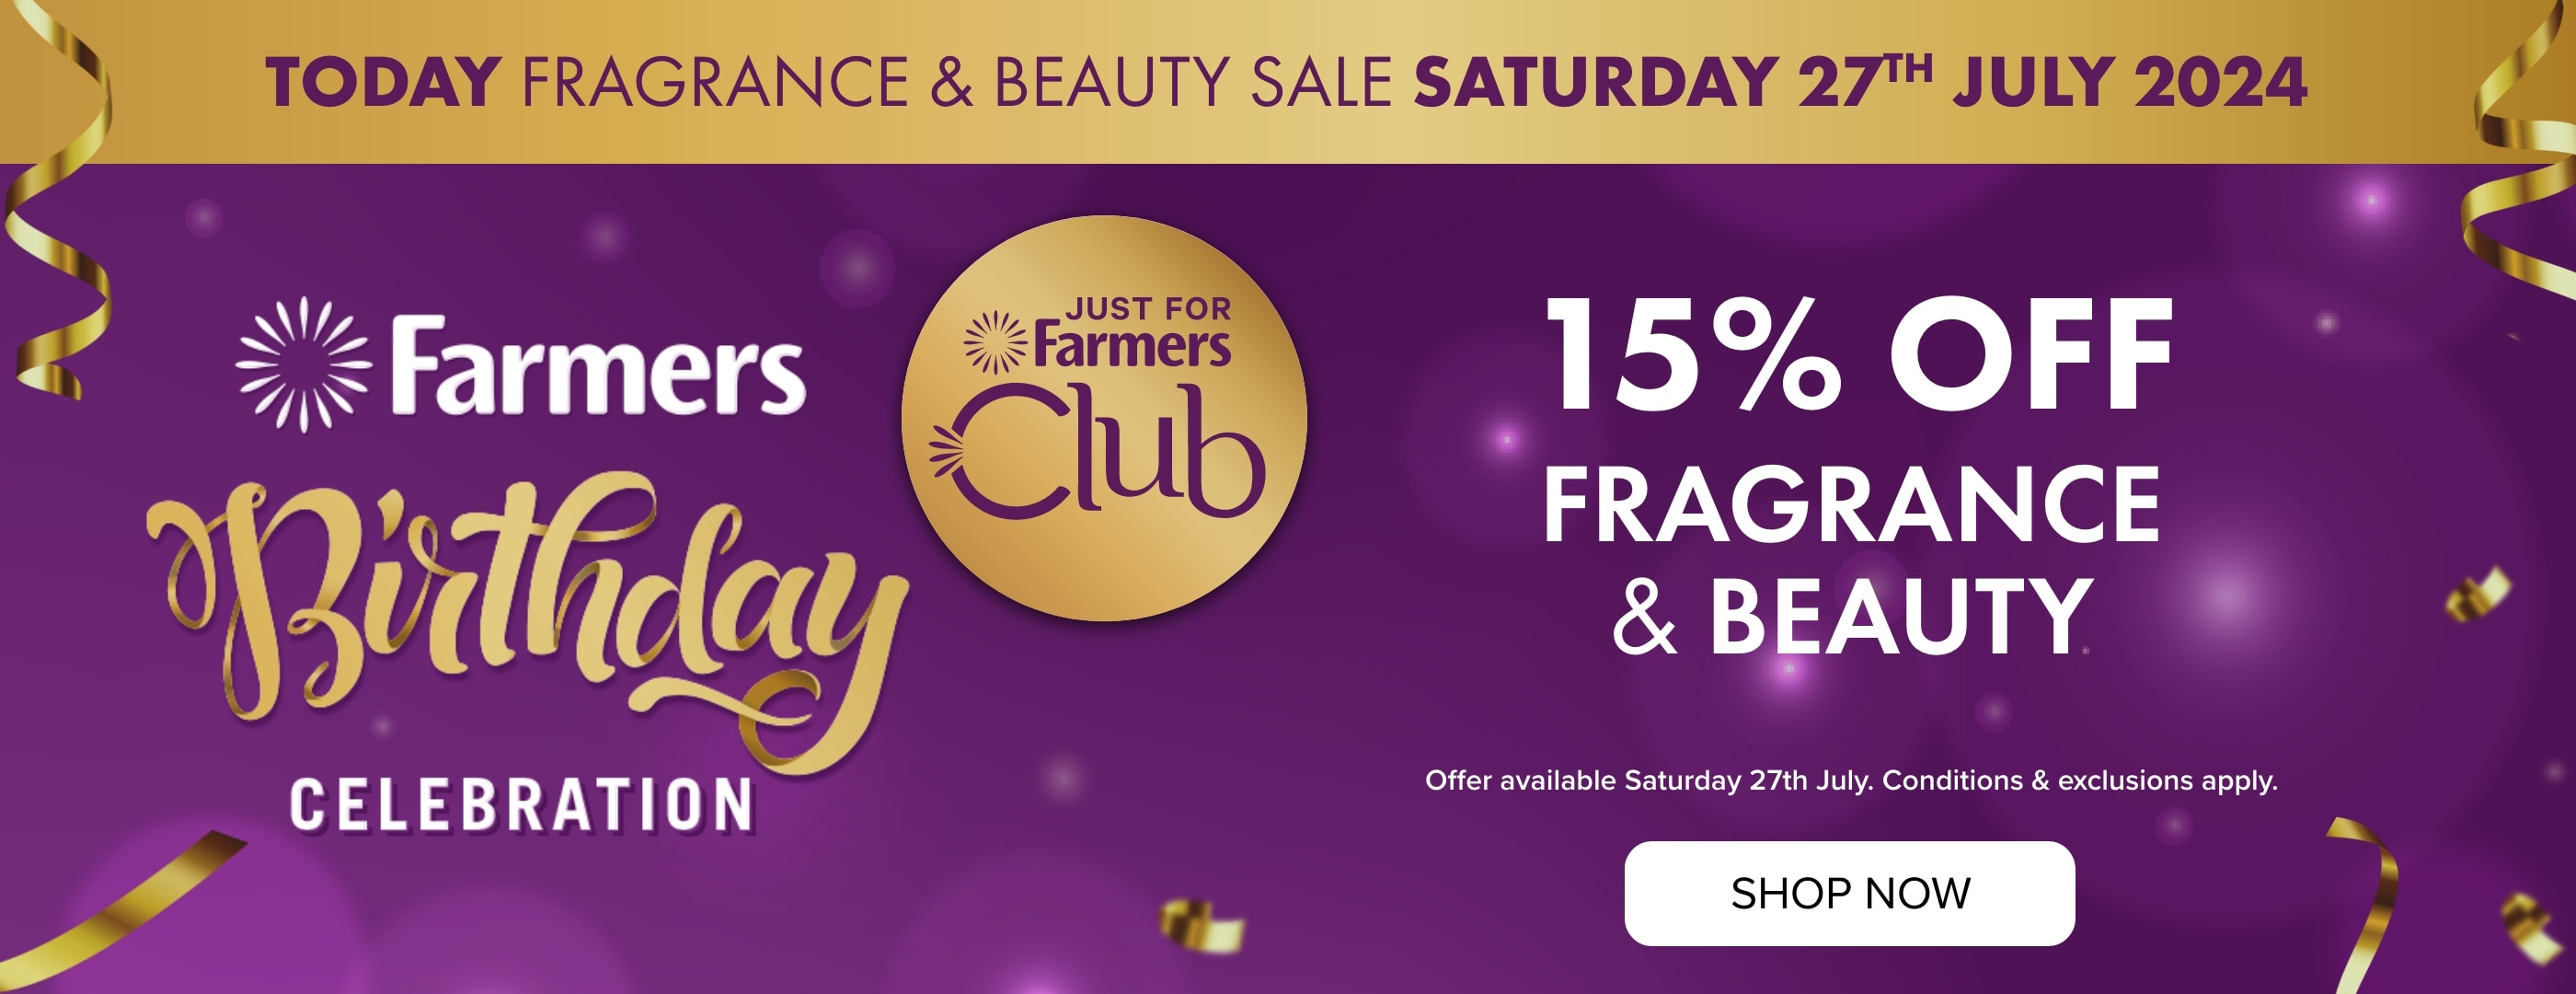 TODAY SALE | SATURDAY 27TH JULY 2024 | 15% OFF Beauty & Fragrance